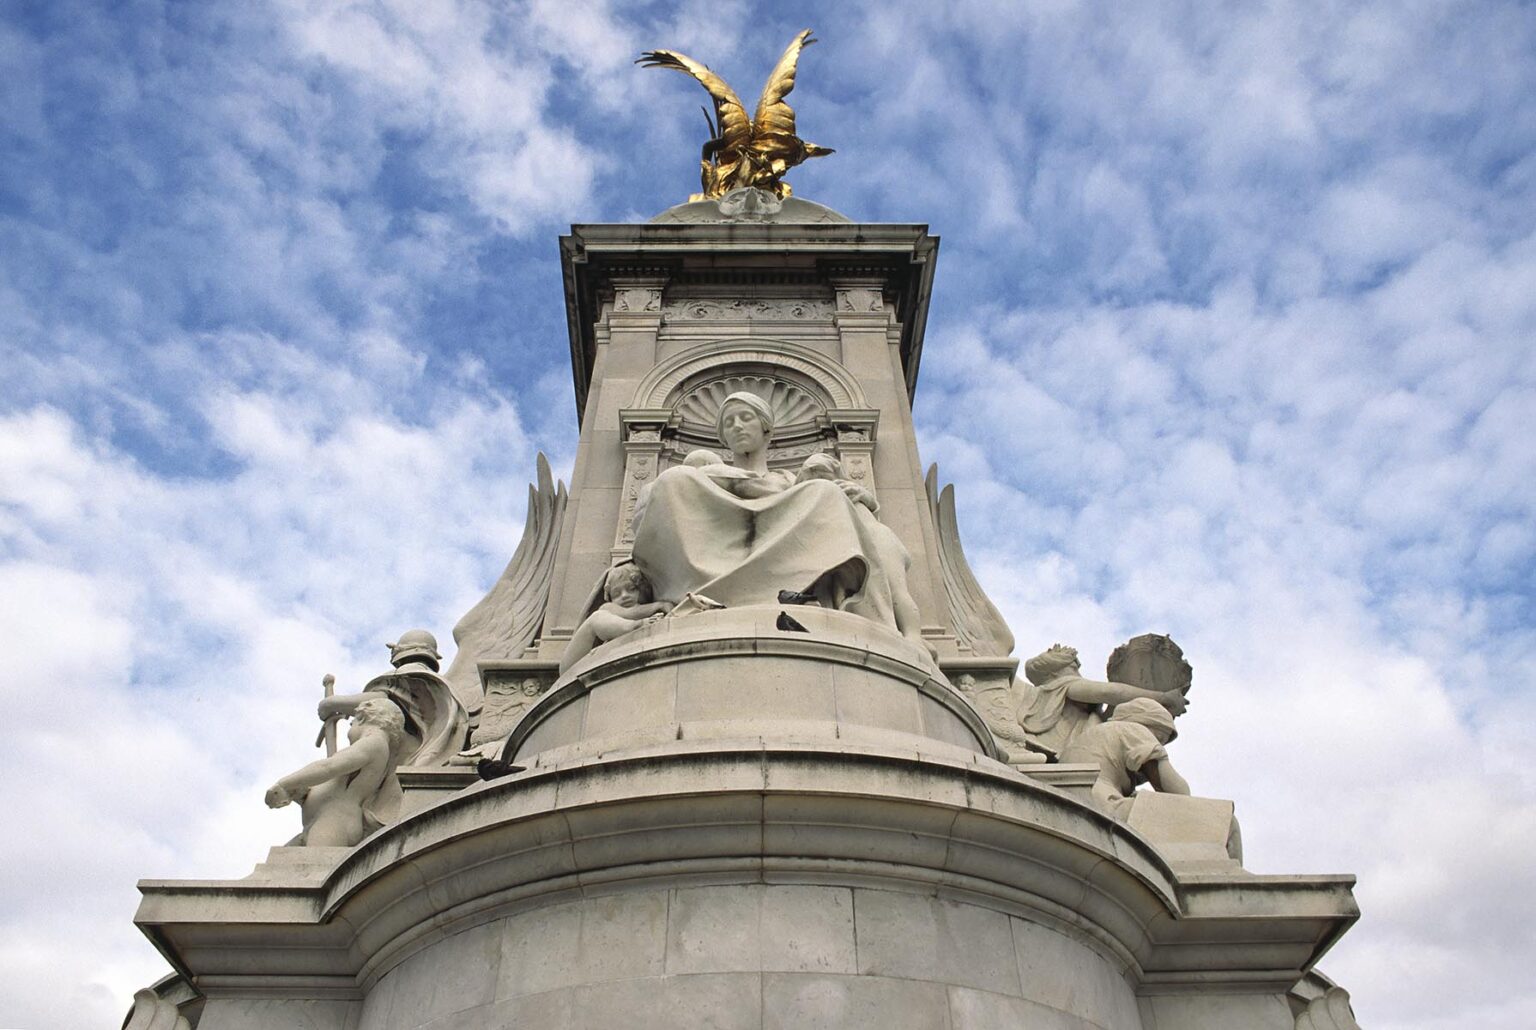 QUEEN VICTORIA MEMORIAL sits in front of BUCKINGHAM PALACE - LONDON, ENGLAND